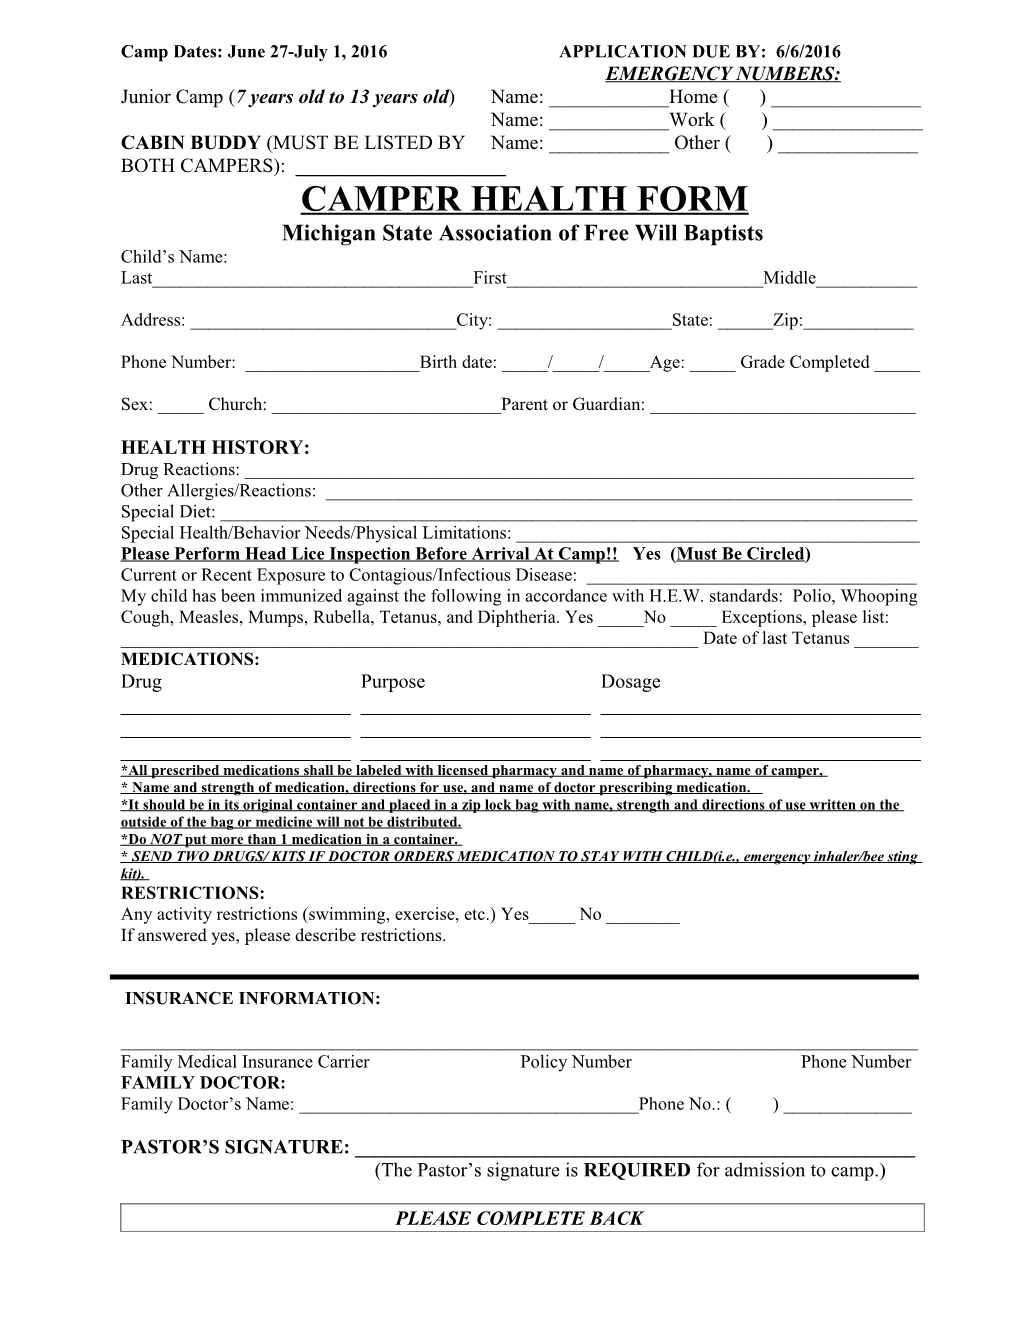 Camp Dates: June 27-July 1, 2016 APPLICATION DUE BY: 6/6/2016 EMERGENCY NUMBERS